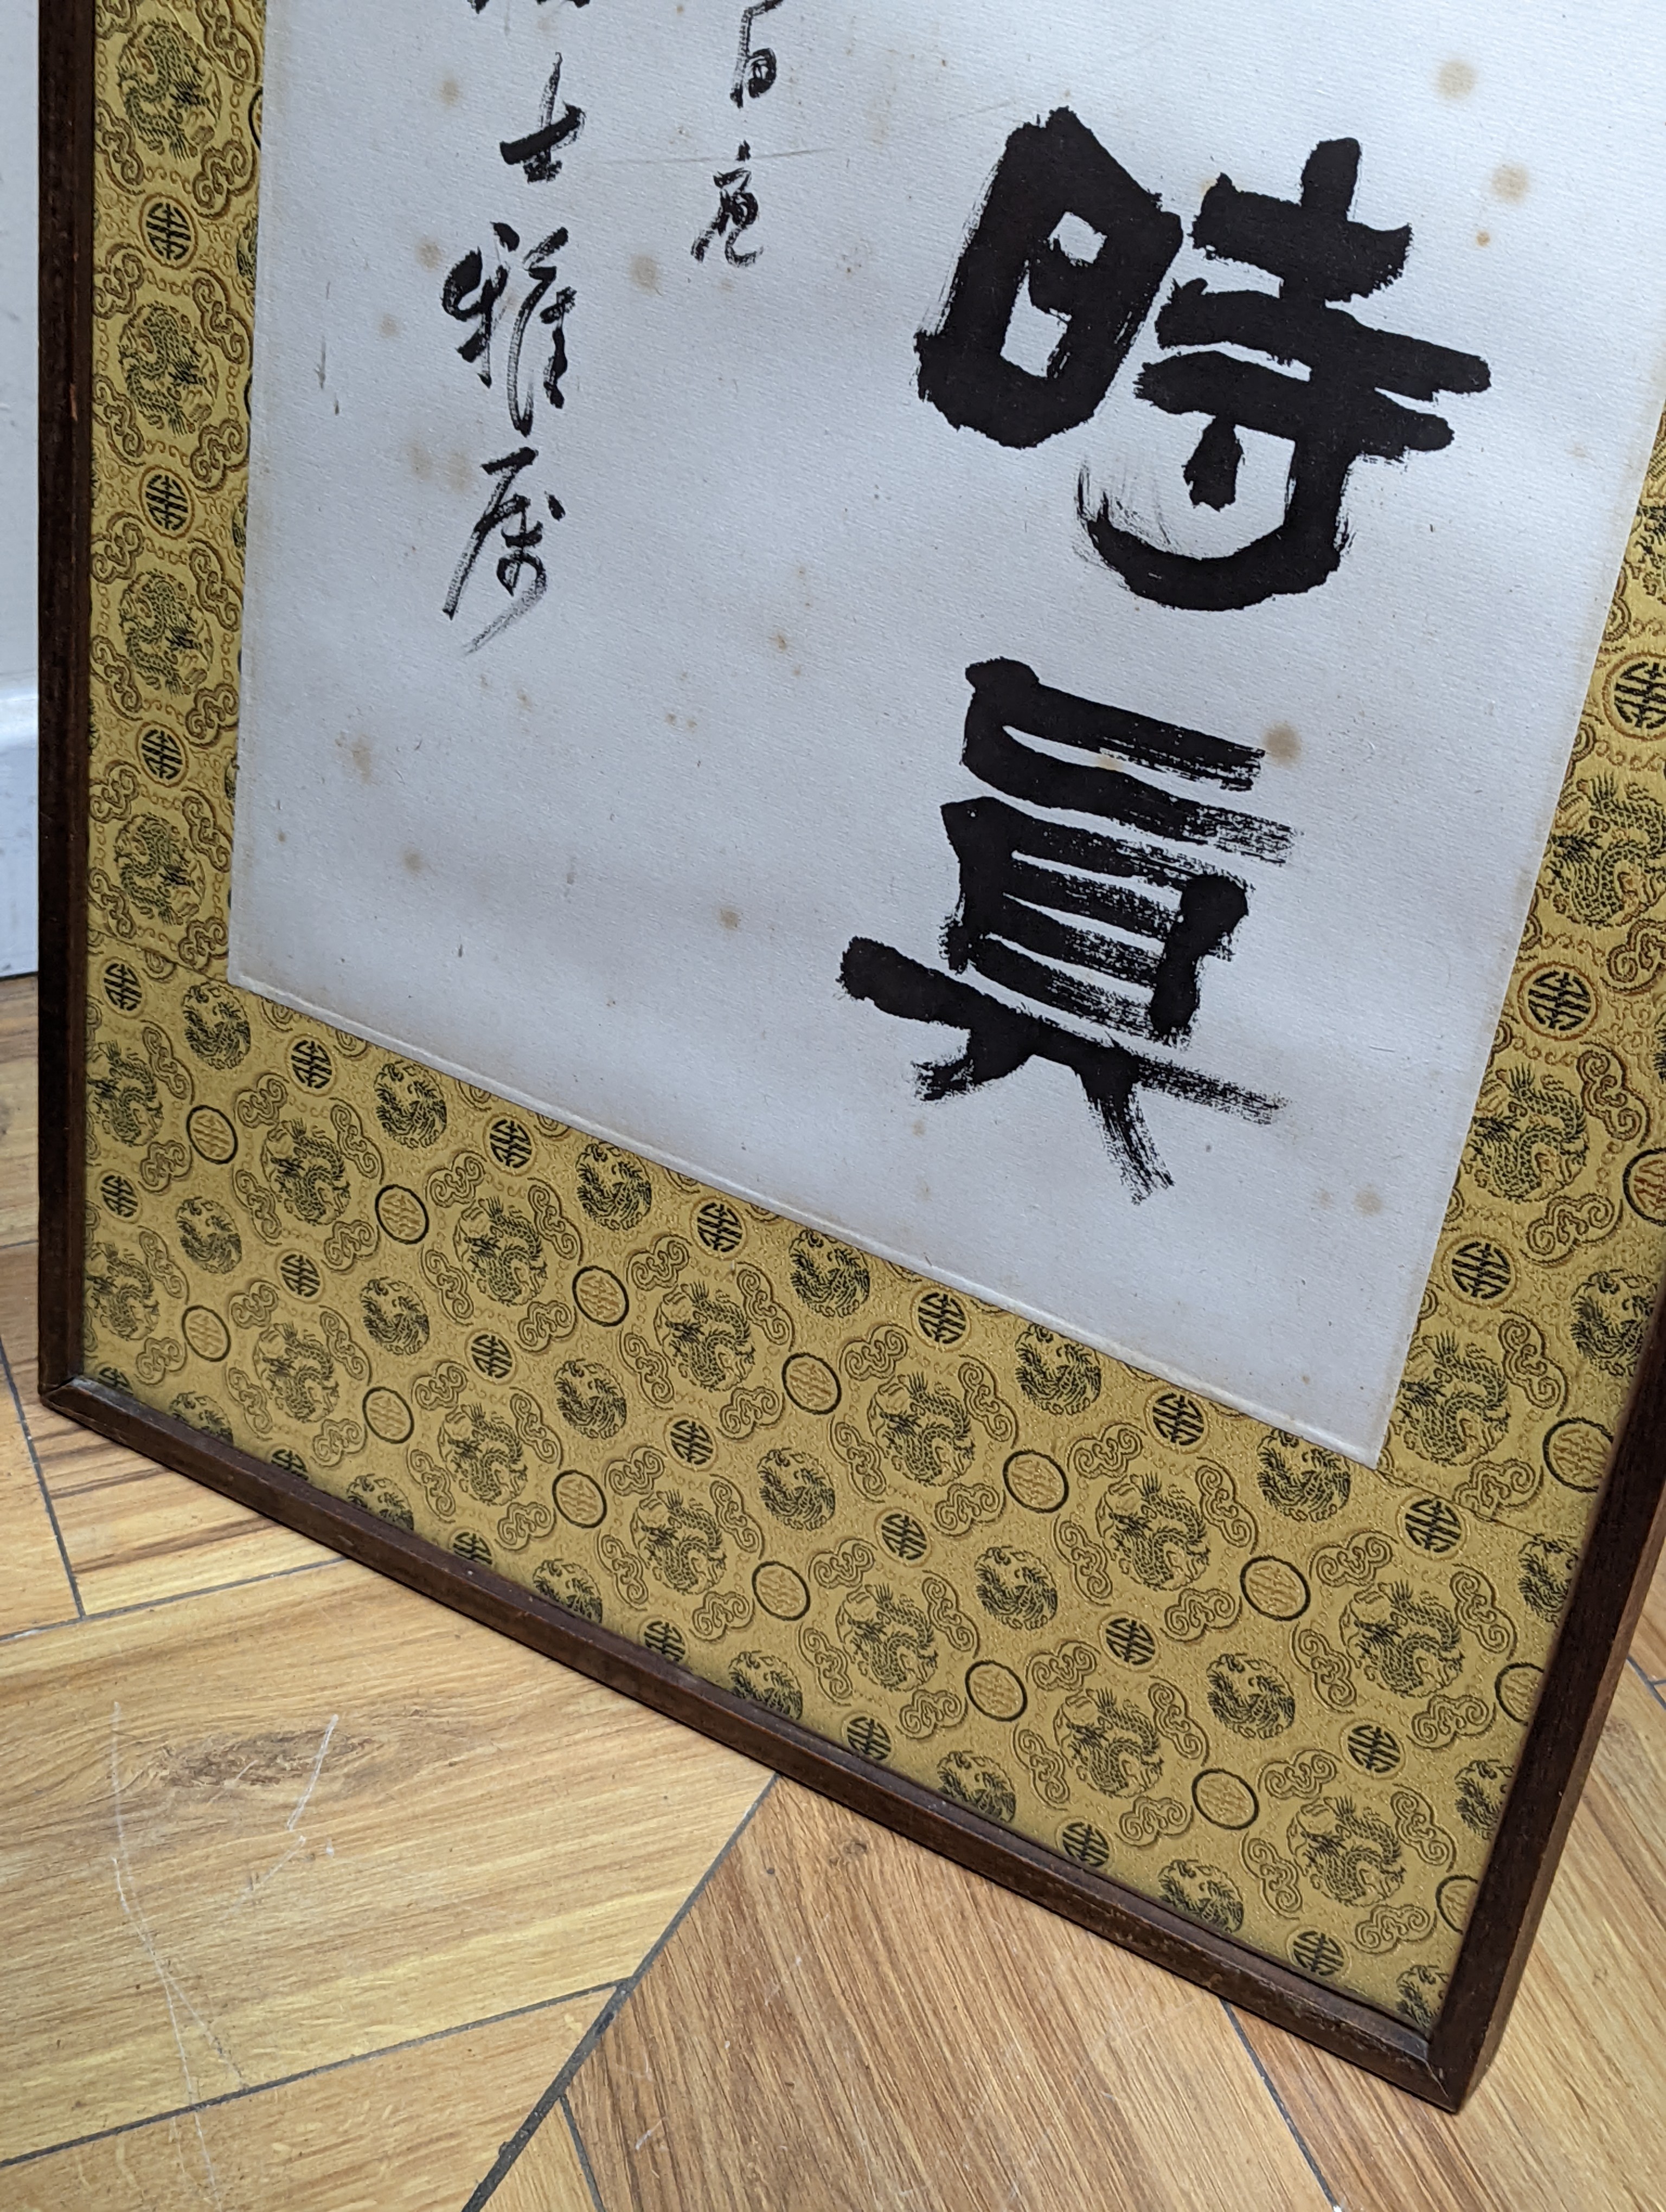 A set of four Chinese calligraphic ink paintings, each 80 x 32 cm excluding brocade borders